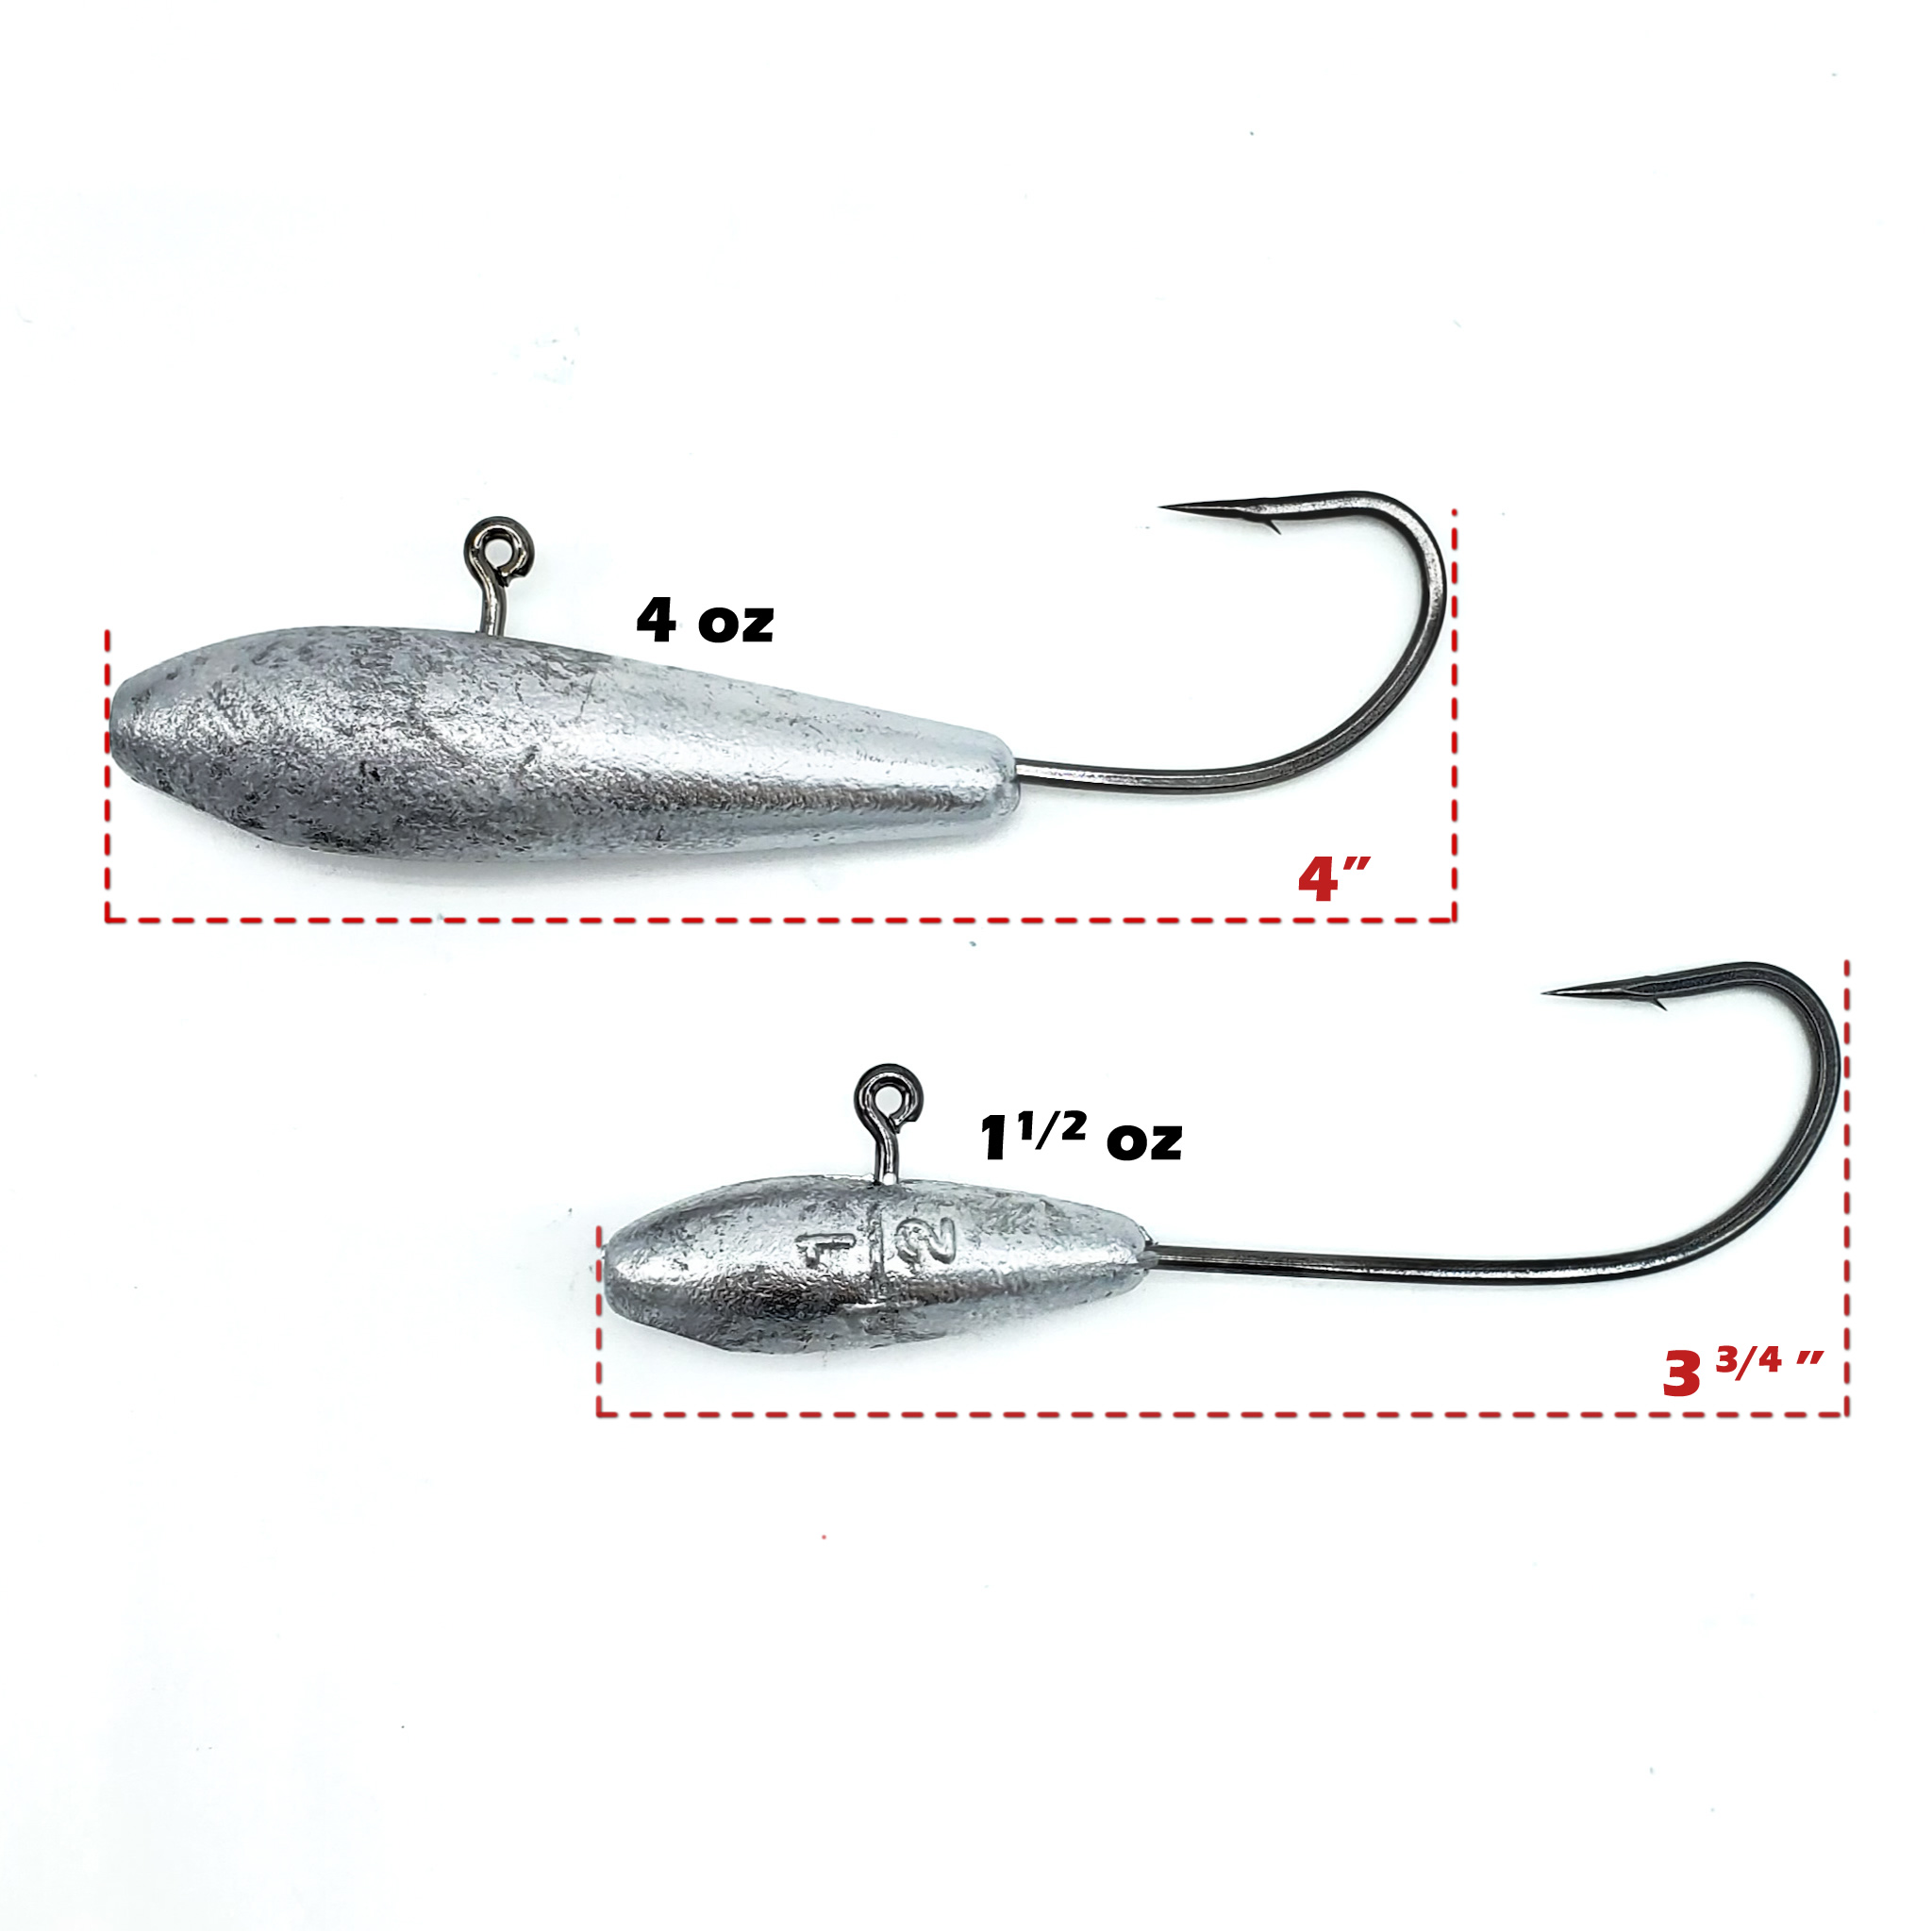 jig head molds fishing, jig head molds fishing Suppliers and